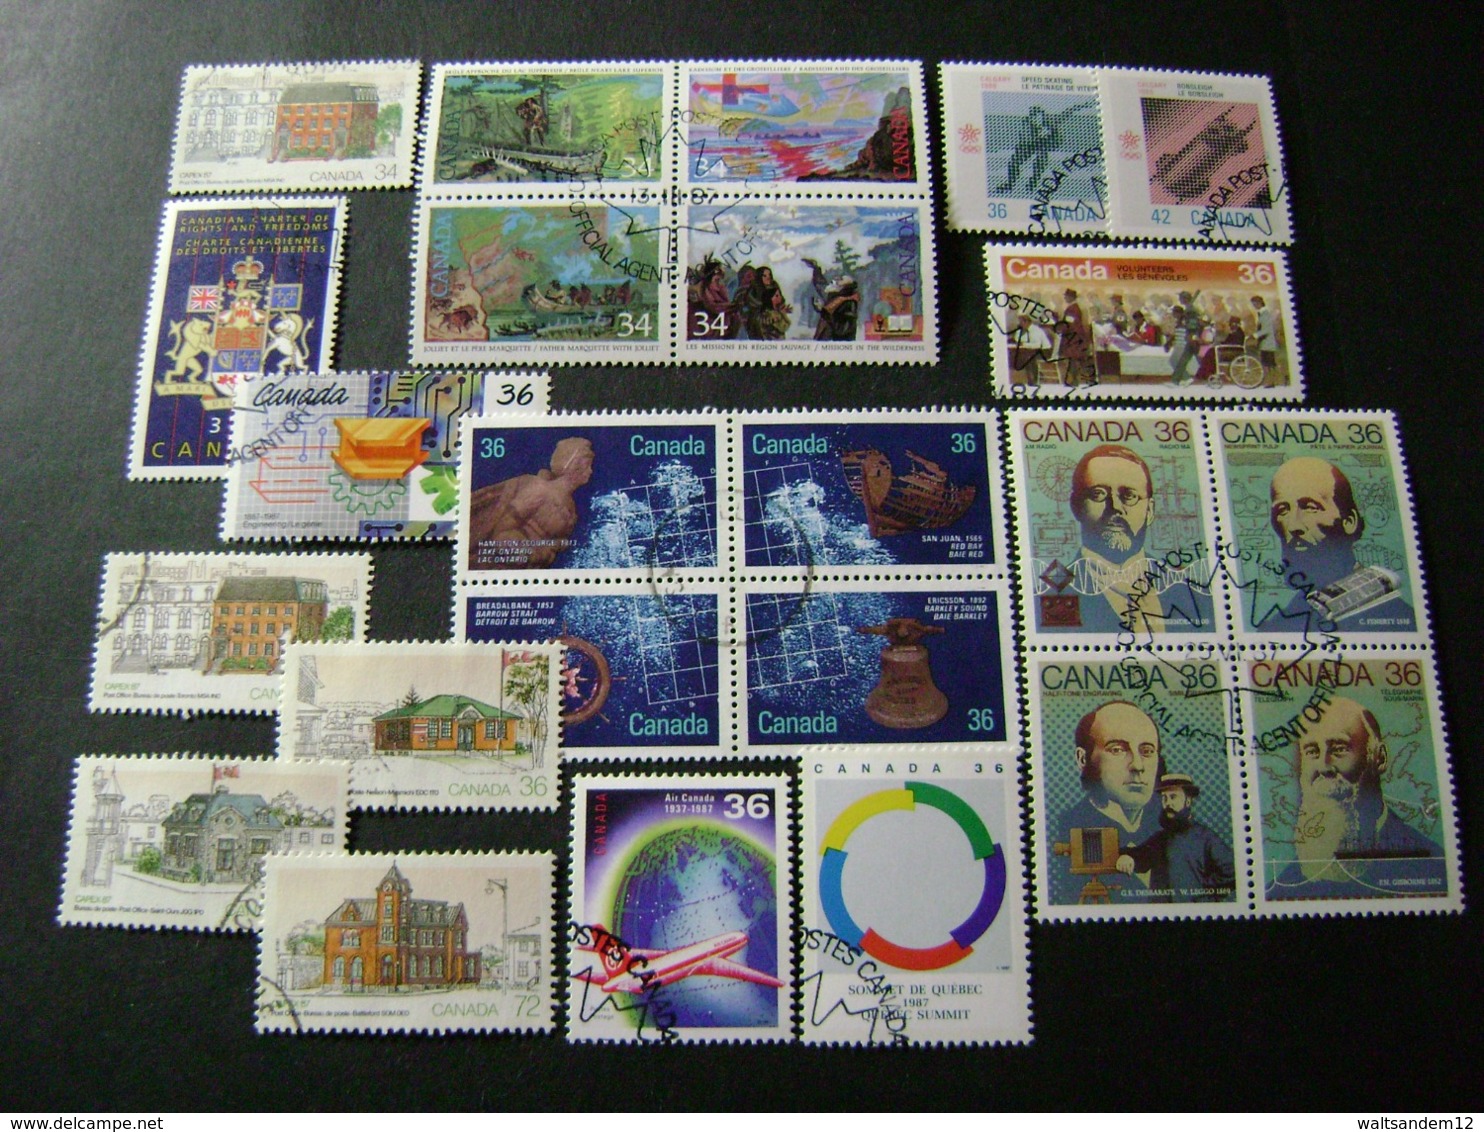 Canada 1987 To 1988 Commemorative/special Issues Complete (SG 1227-1230, 1232-1260, 1281-1314) 3 Images - Used - Complete Years